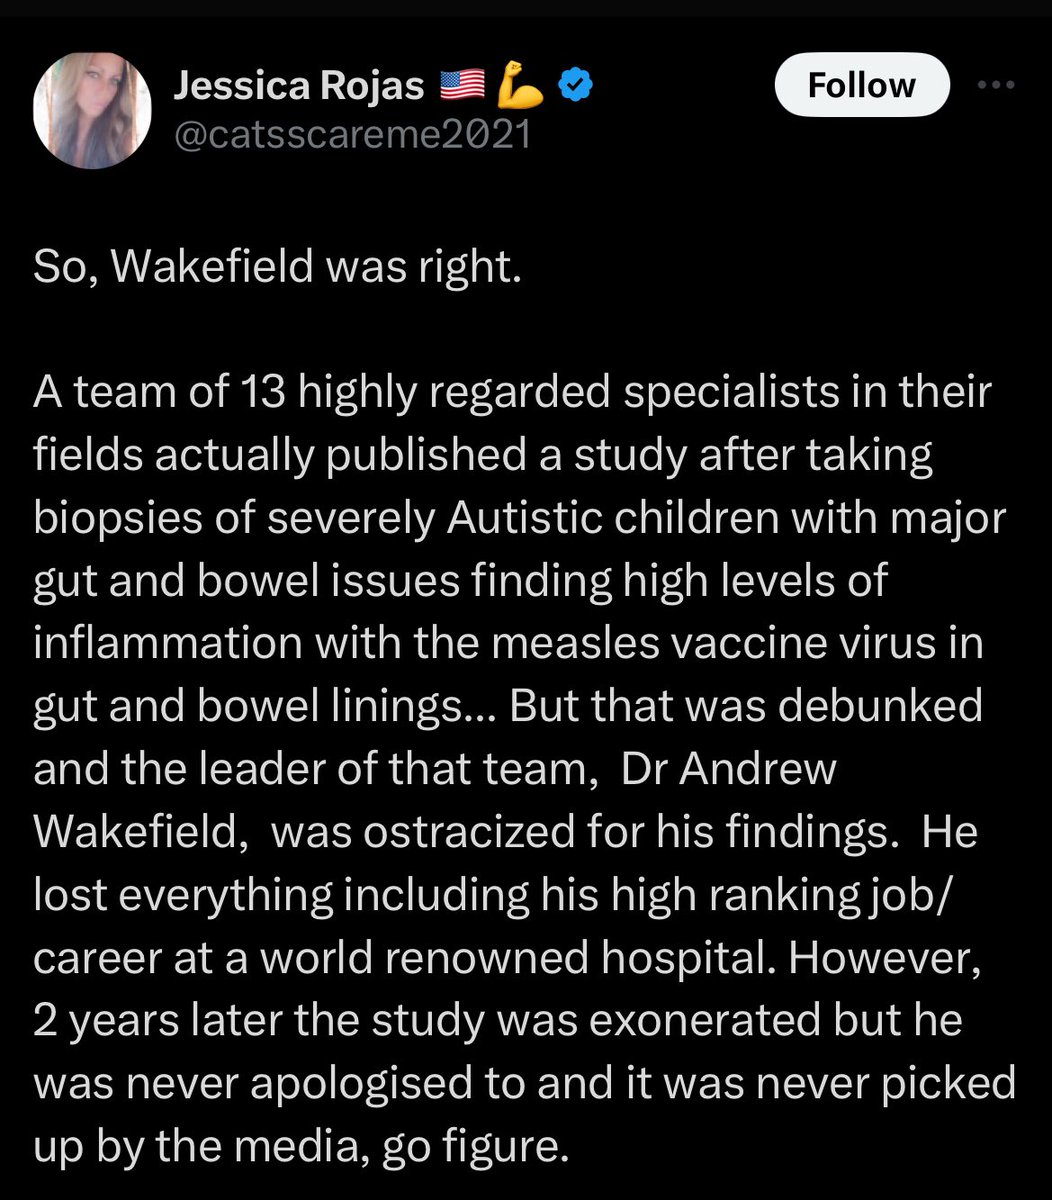 Wakefield is a fraud who experimented on children and put them through unnecessary procedures. No amount of lies will change this 

He’s awful, and and anyone supporting him needs to rethink their stance 

Read the citation:

bmj.com/content/342/bm…

#VaccinesSaveLives